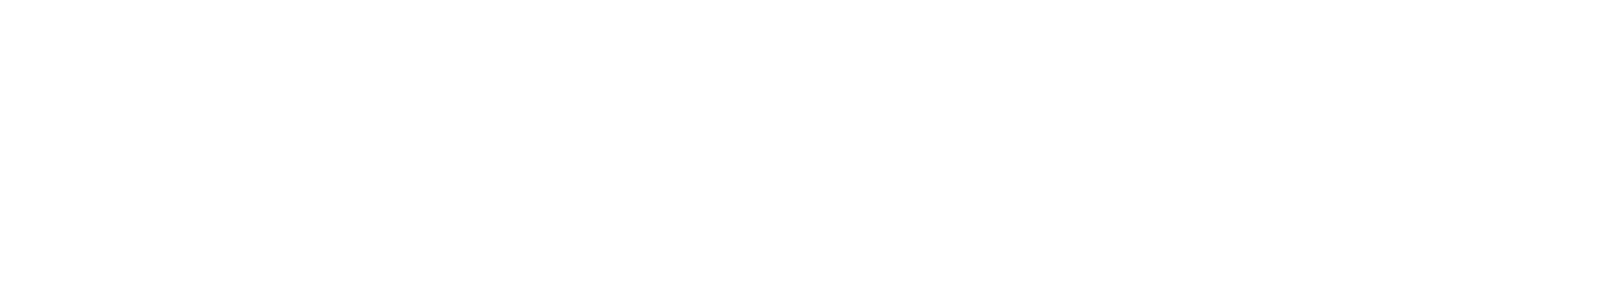 Research and Development: image of a text saying - 'R&D'